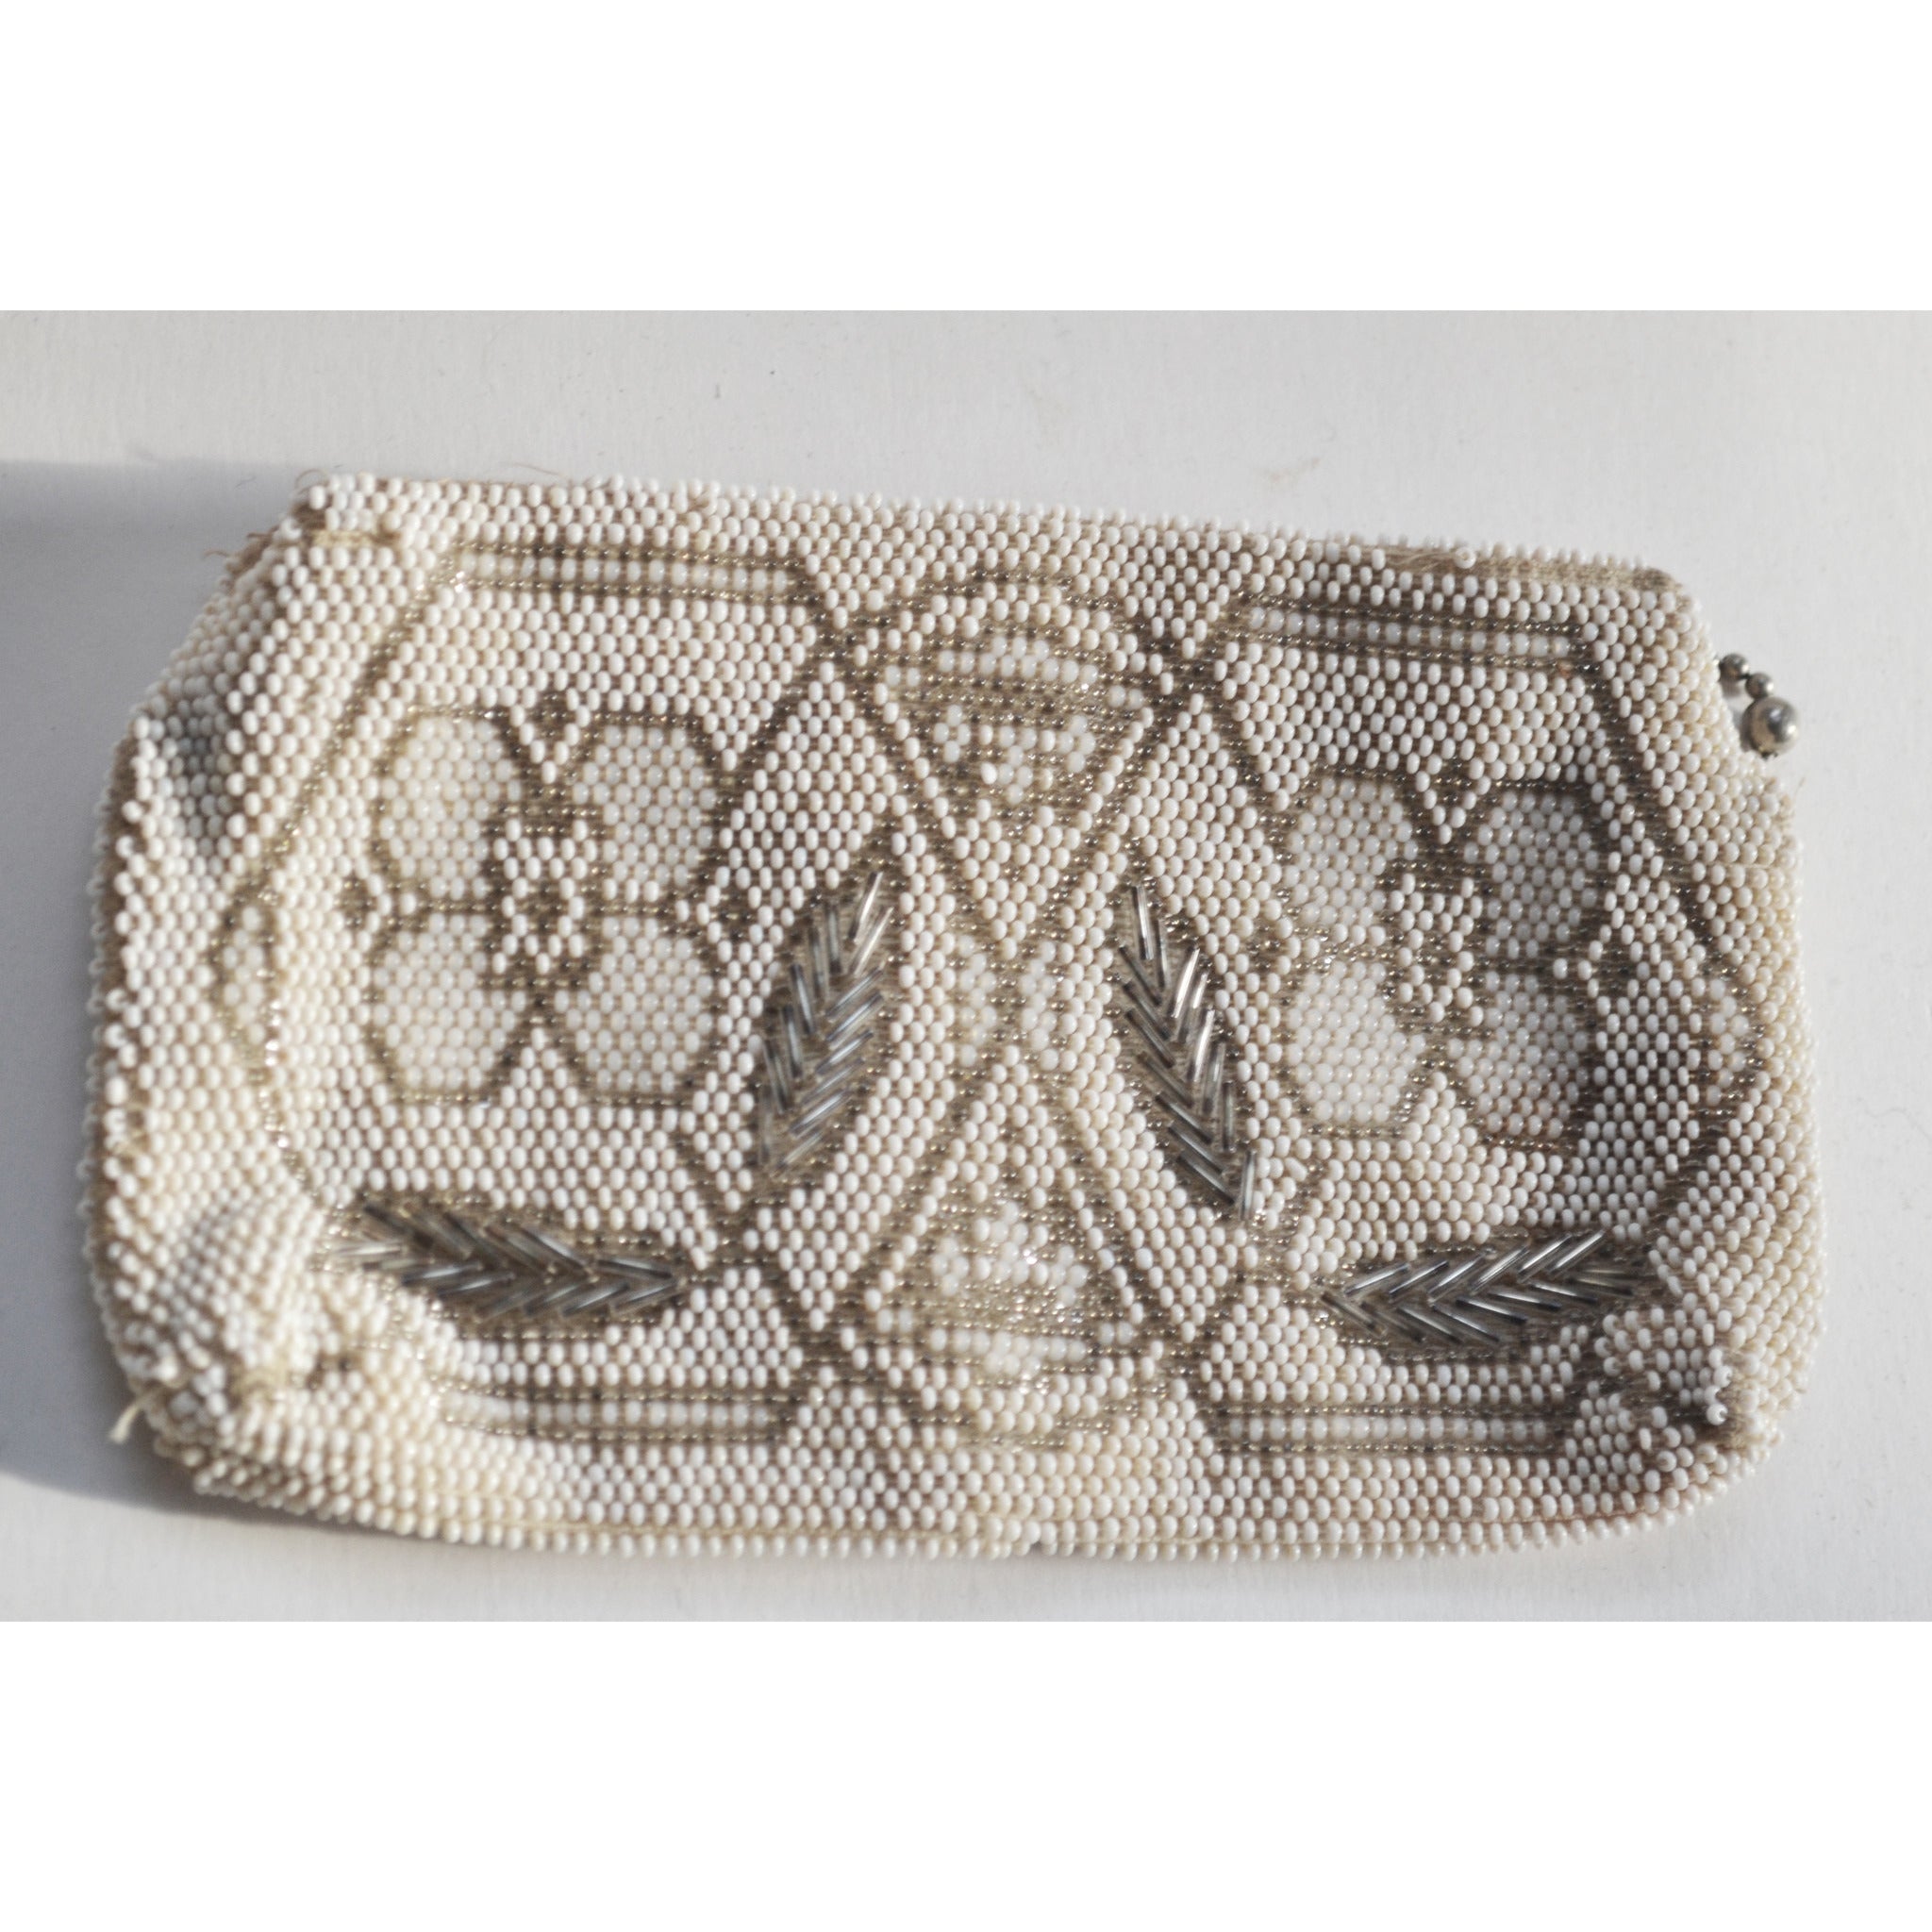 Small Vintage 1930s Beaded Clutch Purse, Evening Bag Beads & Faux Pearls